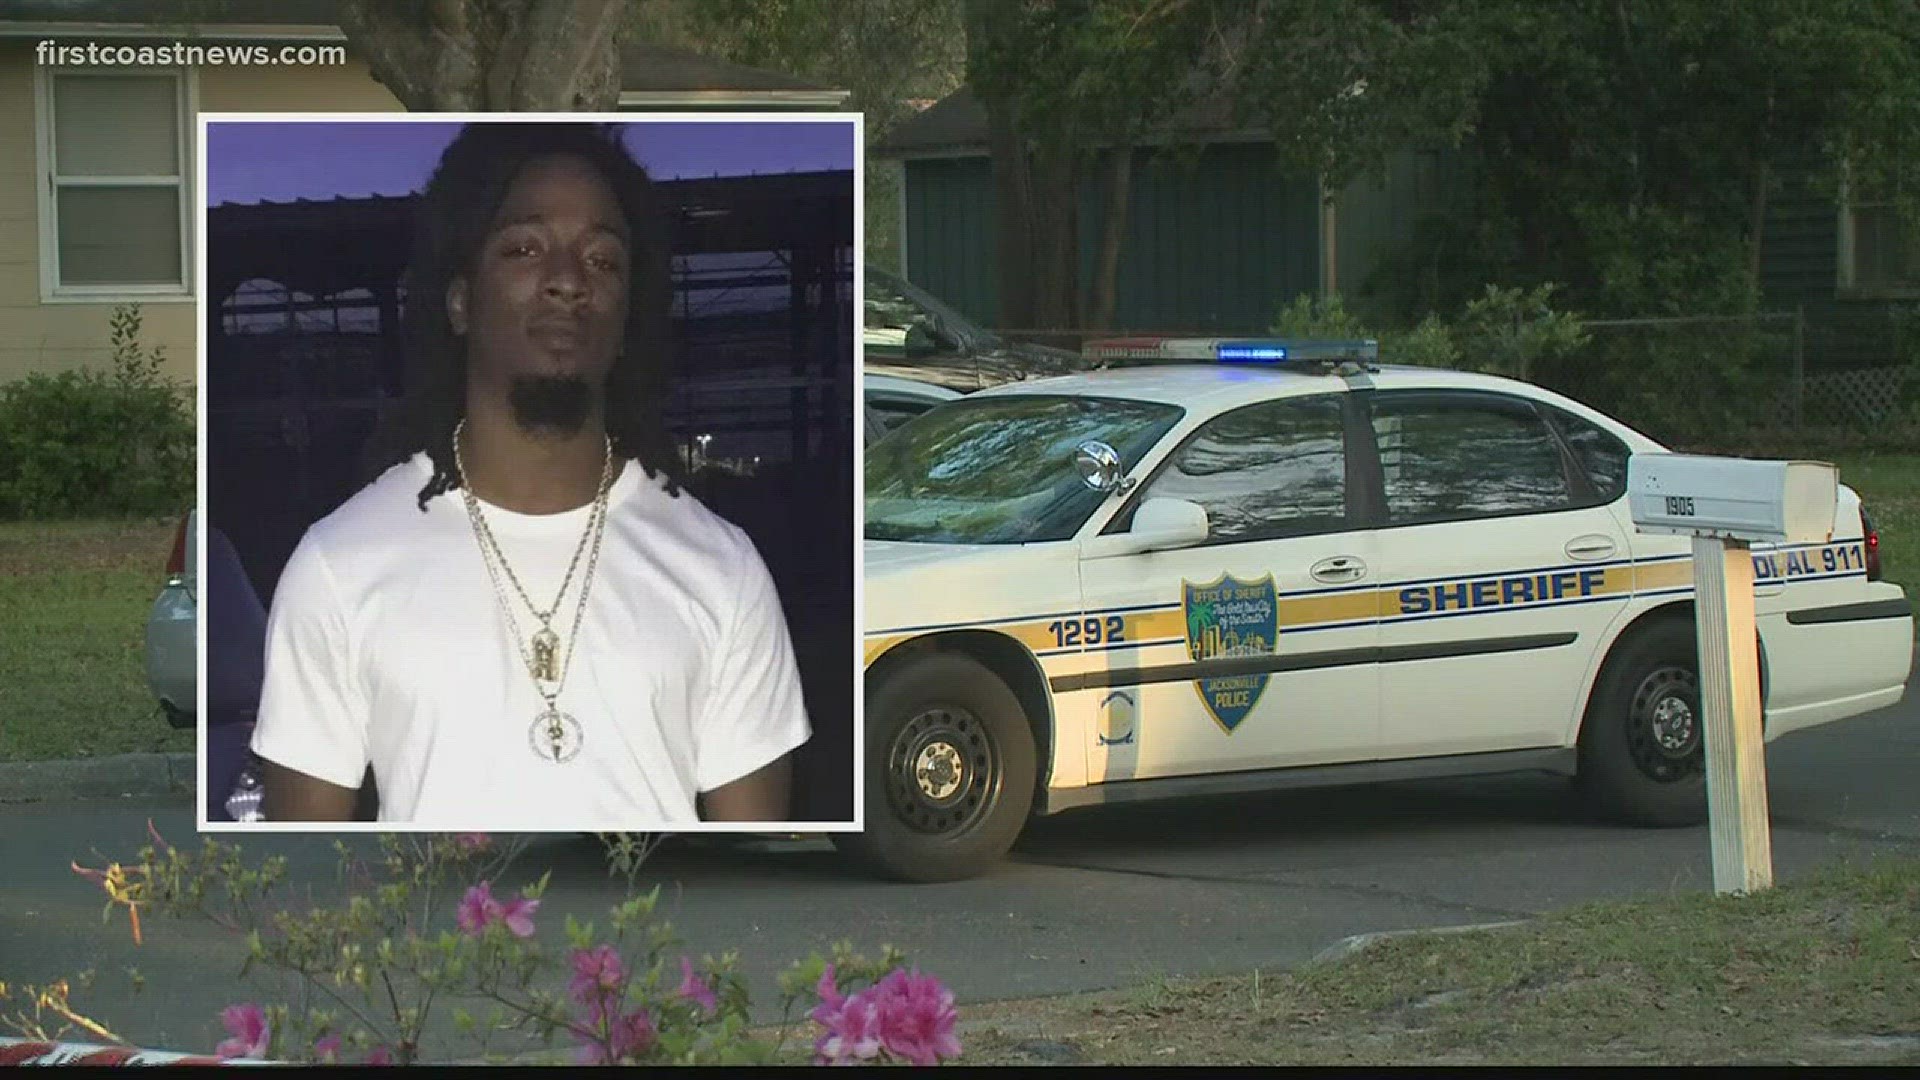 Dominique Lloyd was shot and killed inside of his car in his driveway Sunday morning.